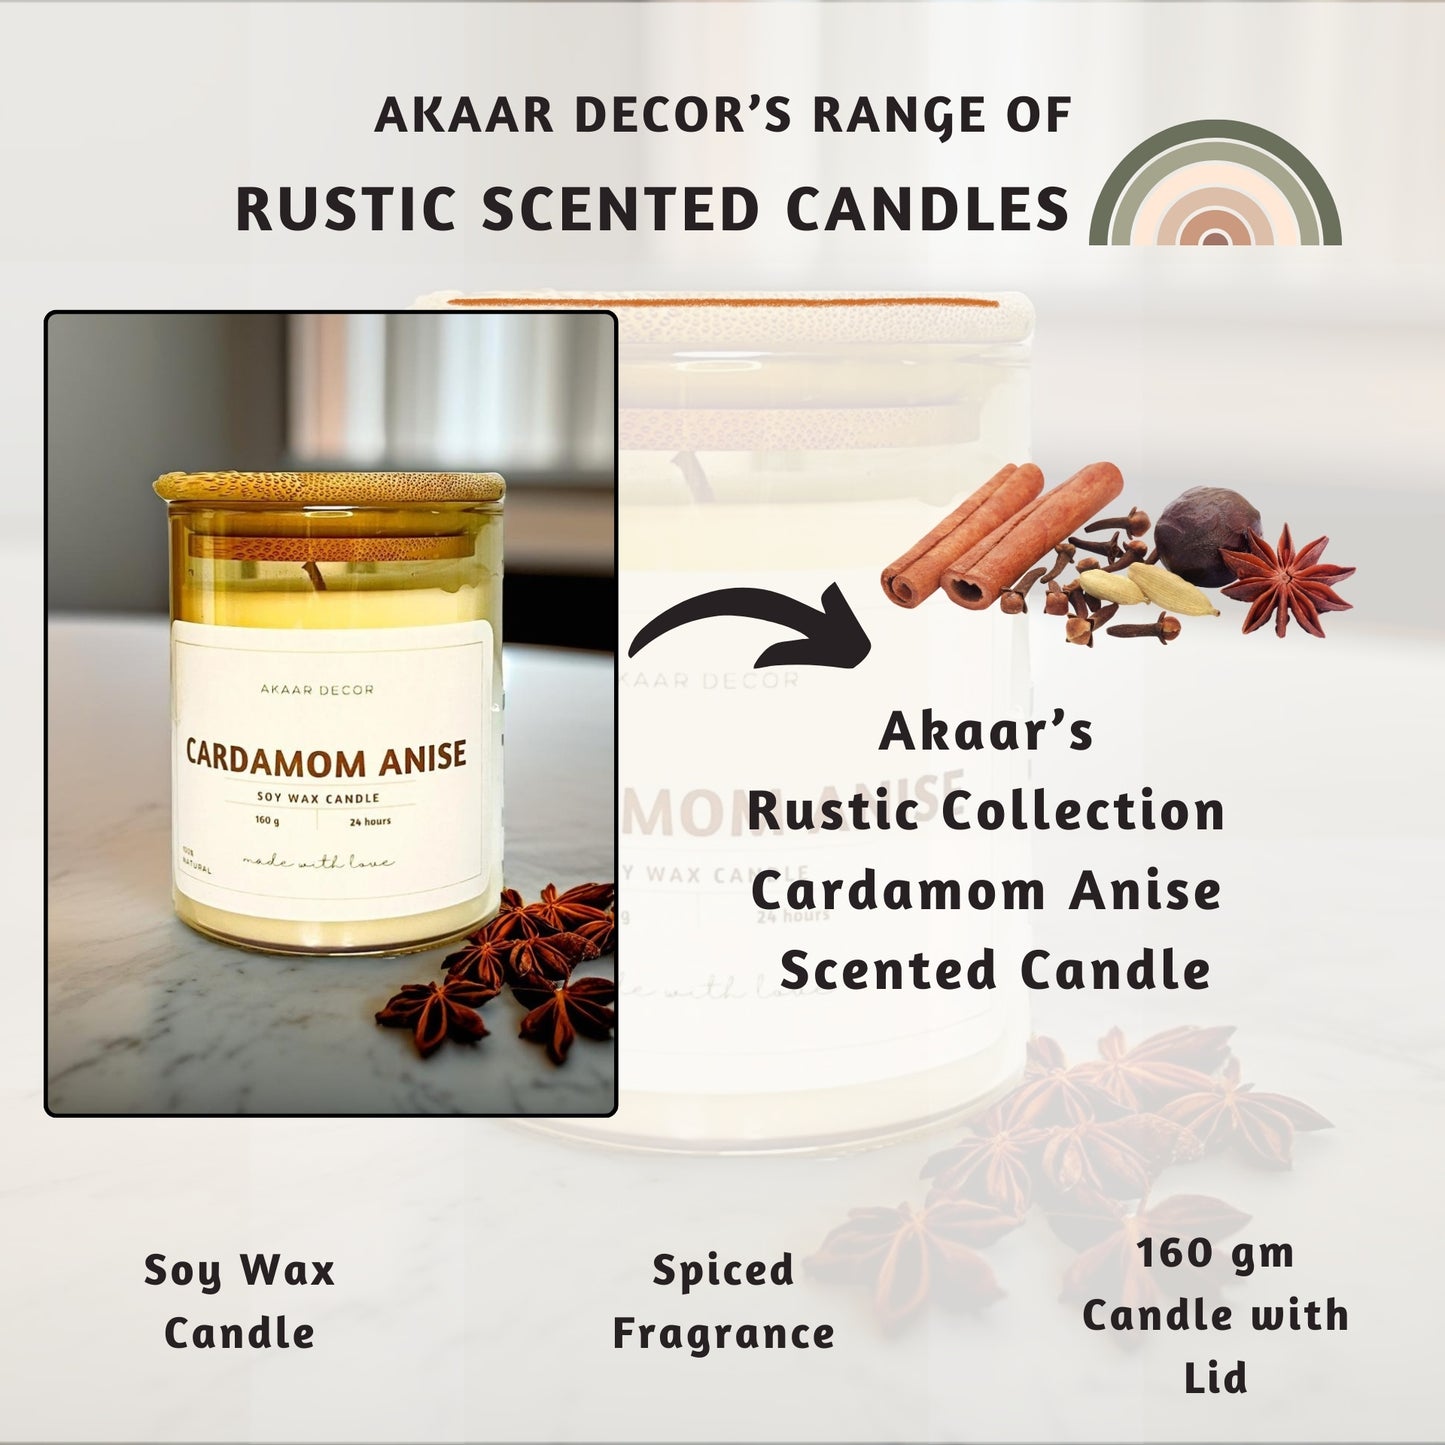 Akaar Decor Range of Rustic Earthy Scented Candles for Home Decor- Cardamom Anise